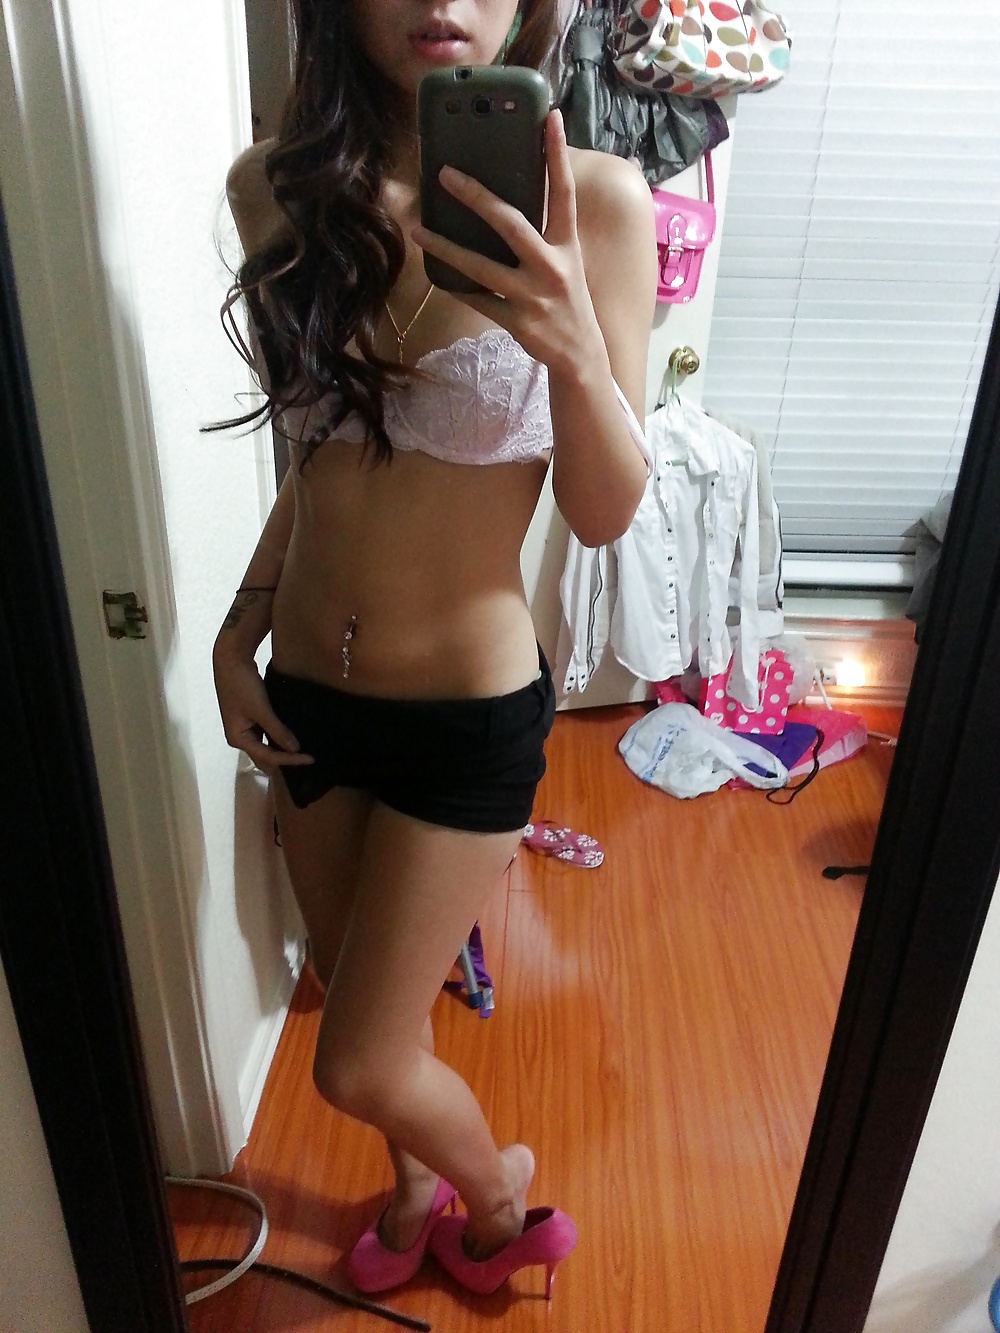 Free Amateurs Asian Delights 22 - Cute selfshooter photos